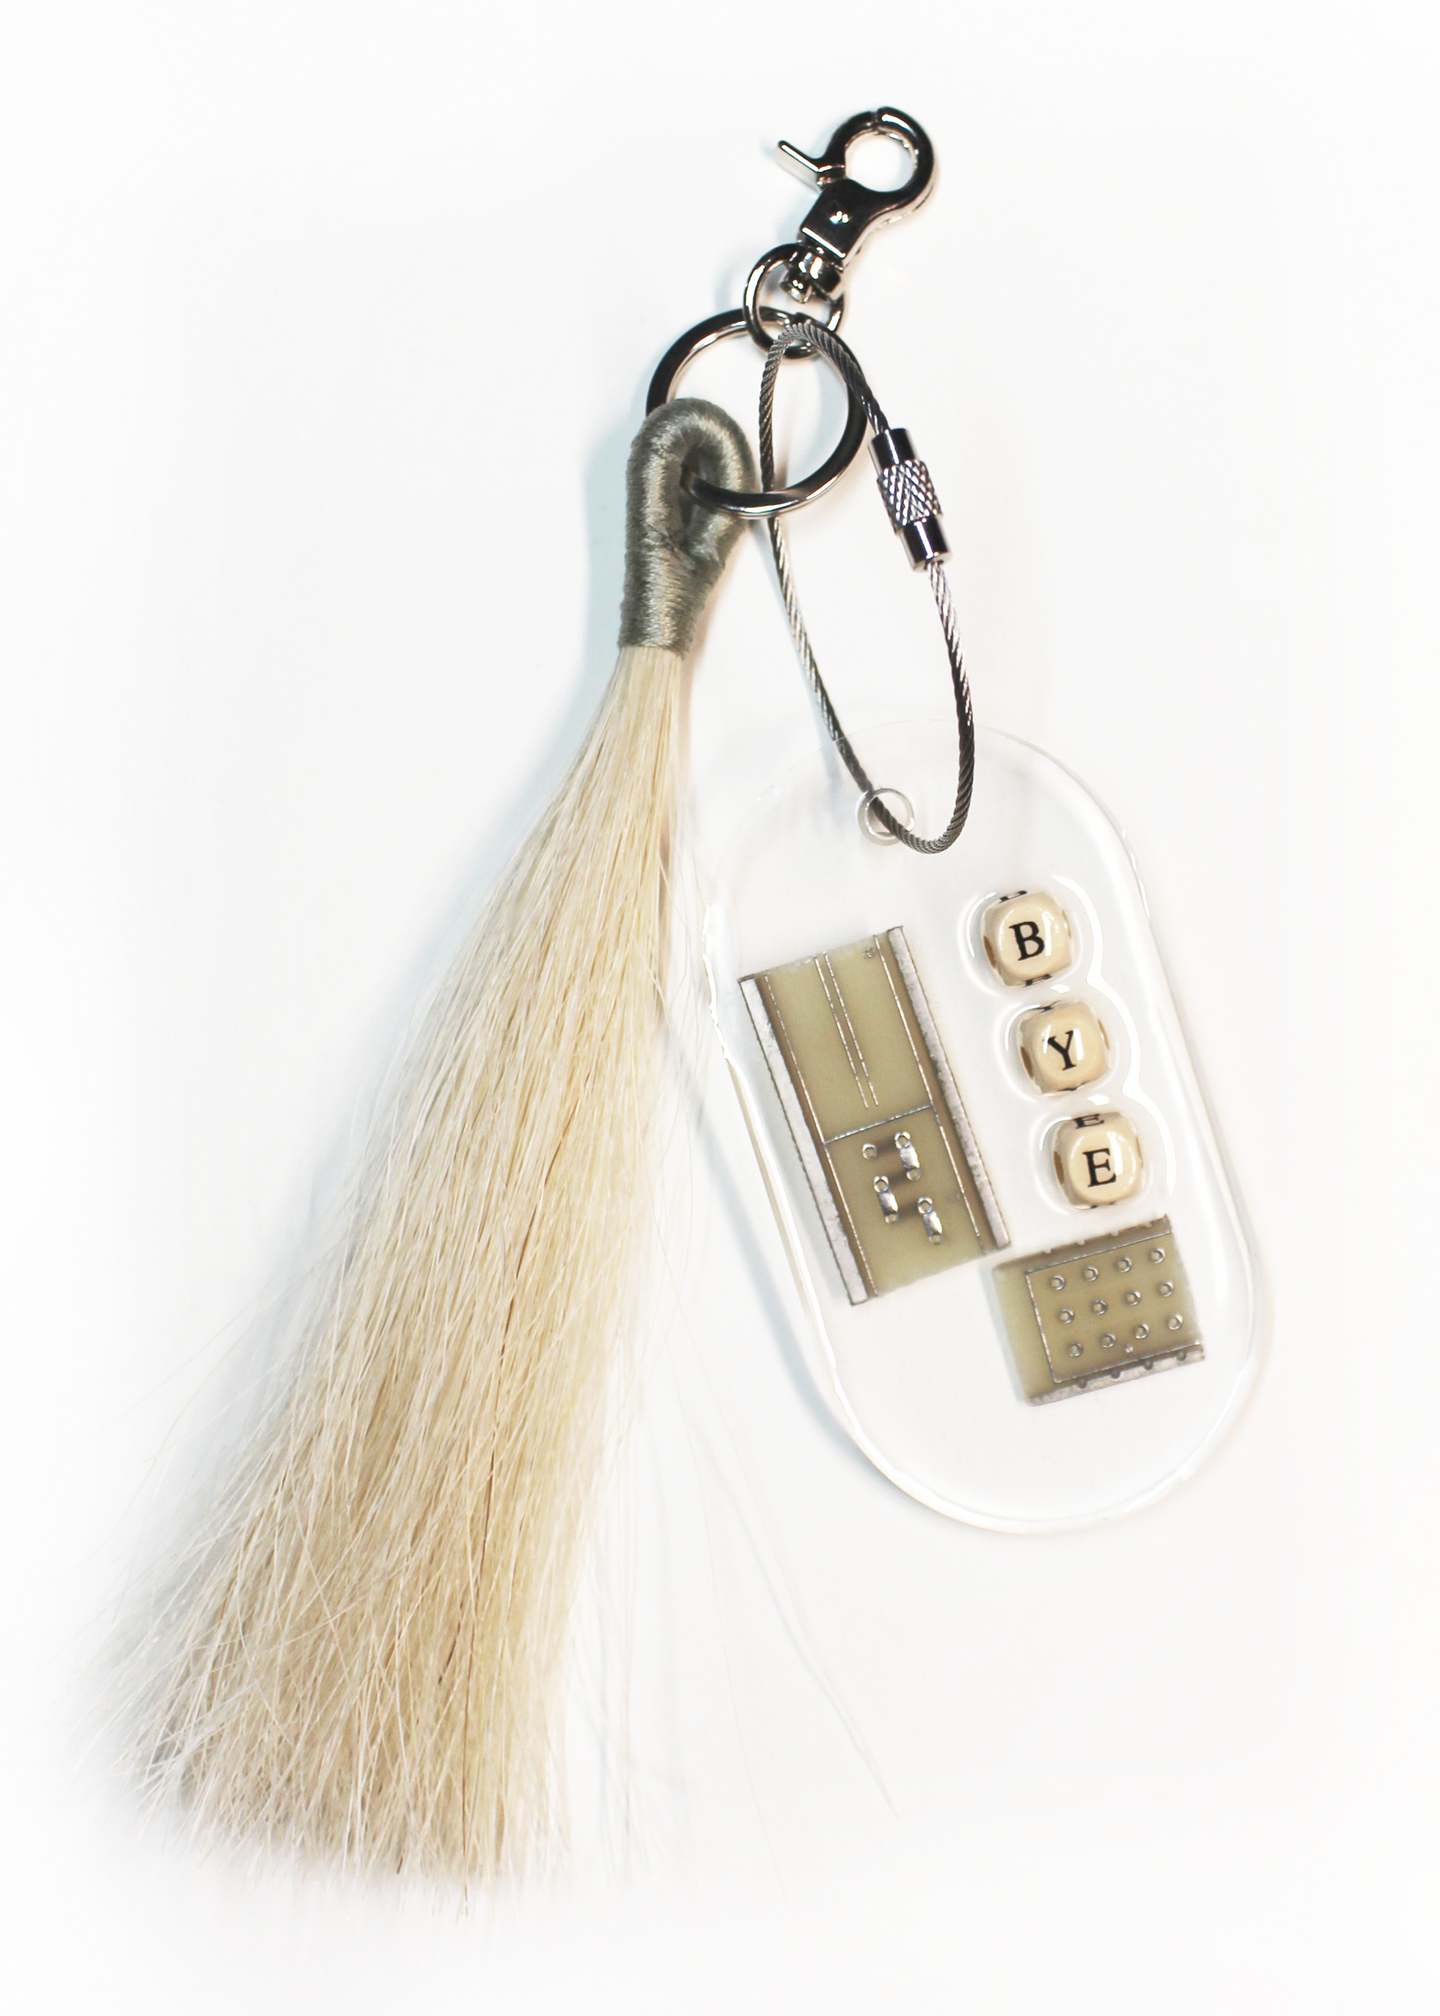 ★Made to Order★ “Secret Note” Sensory Keychain